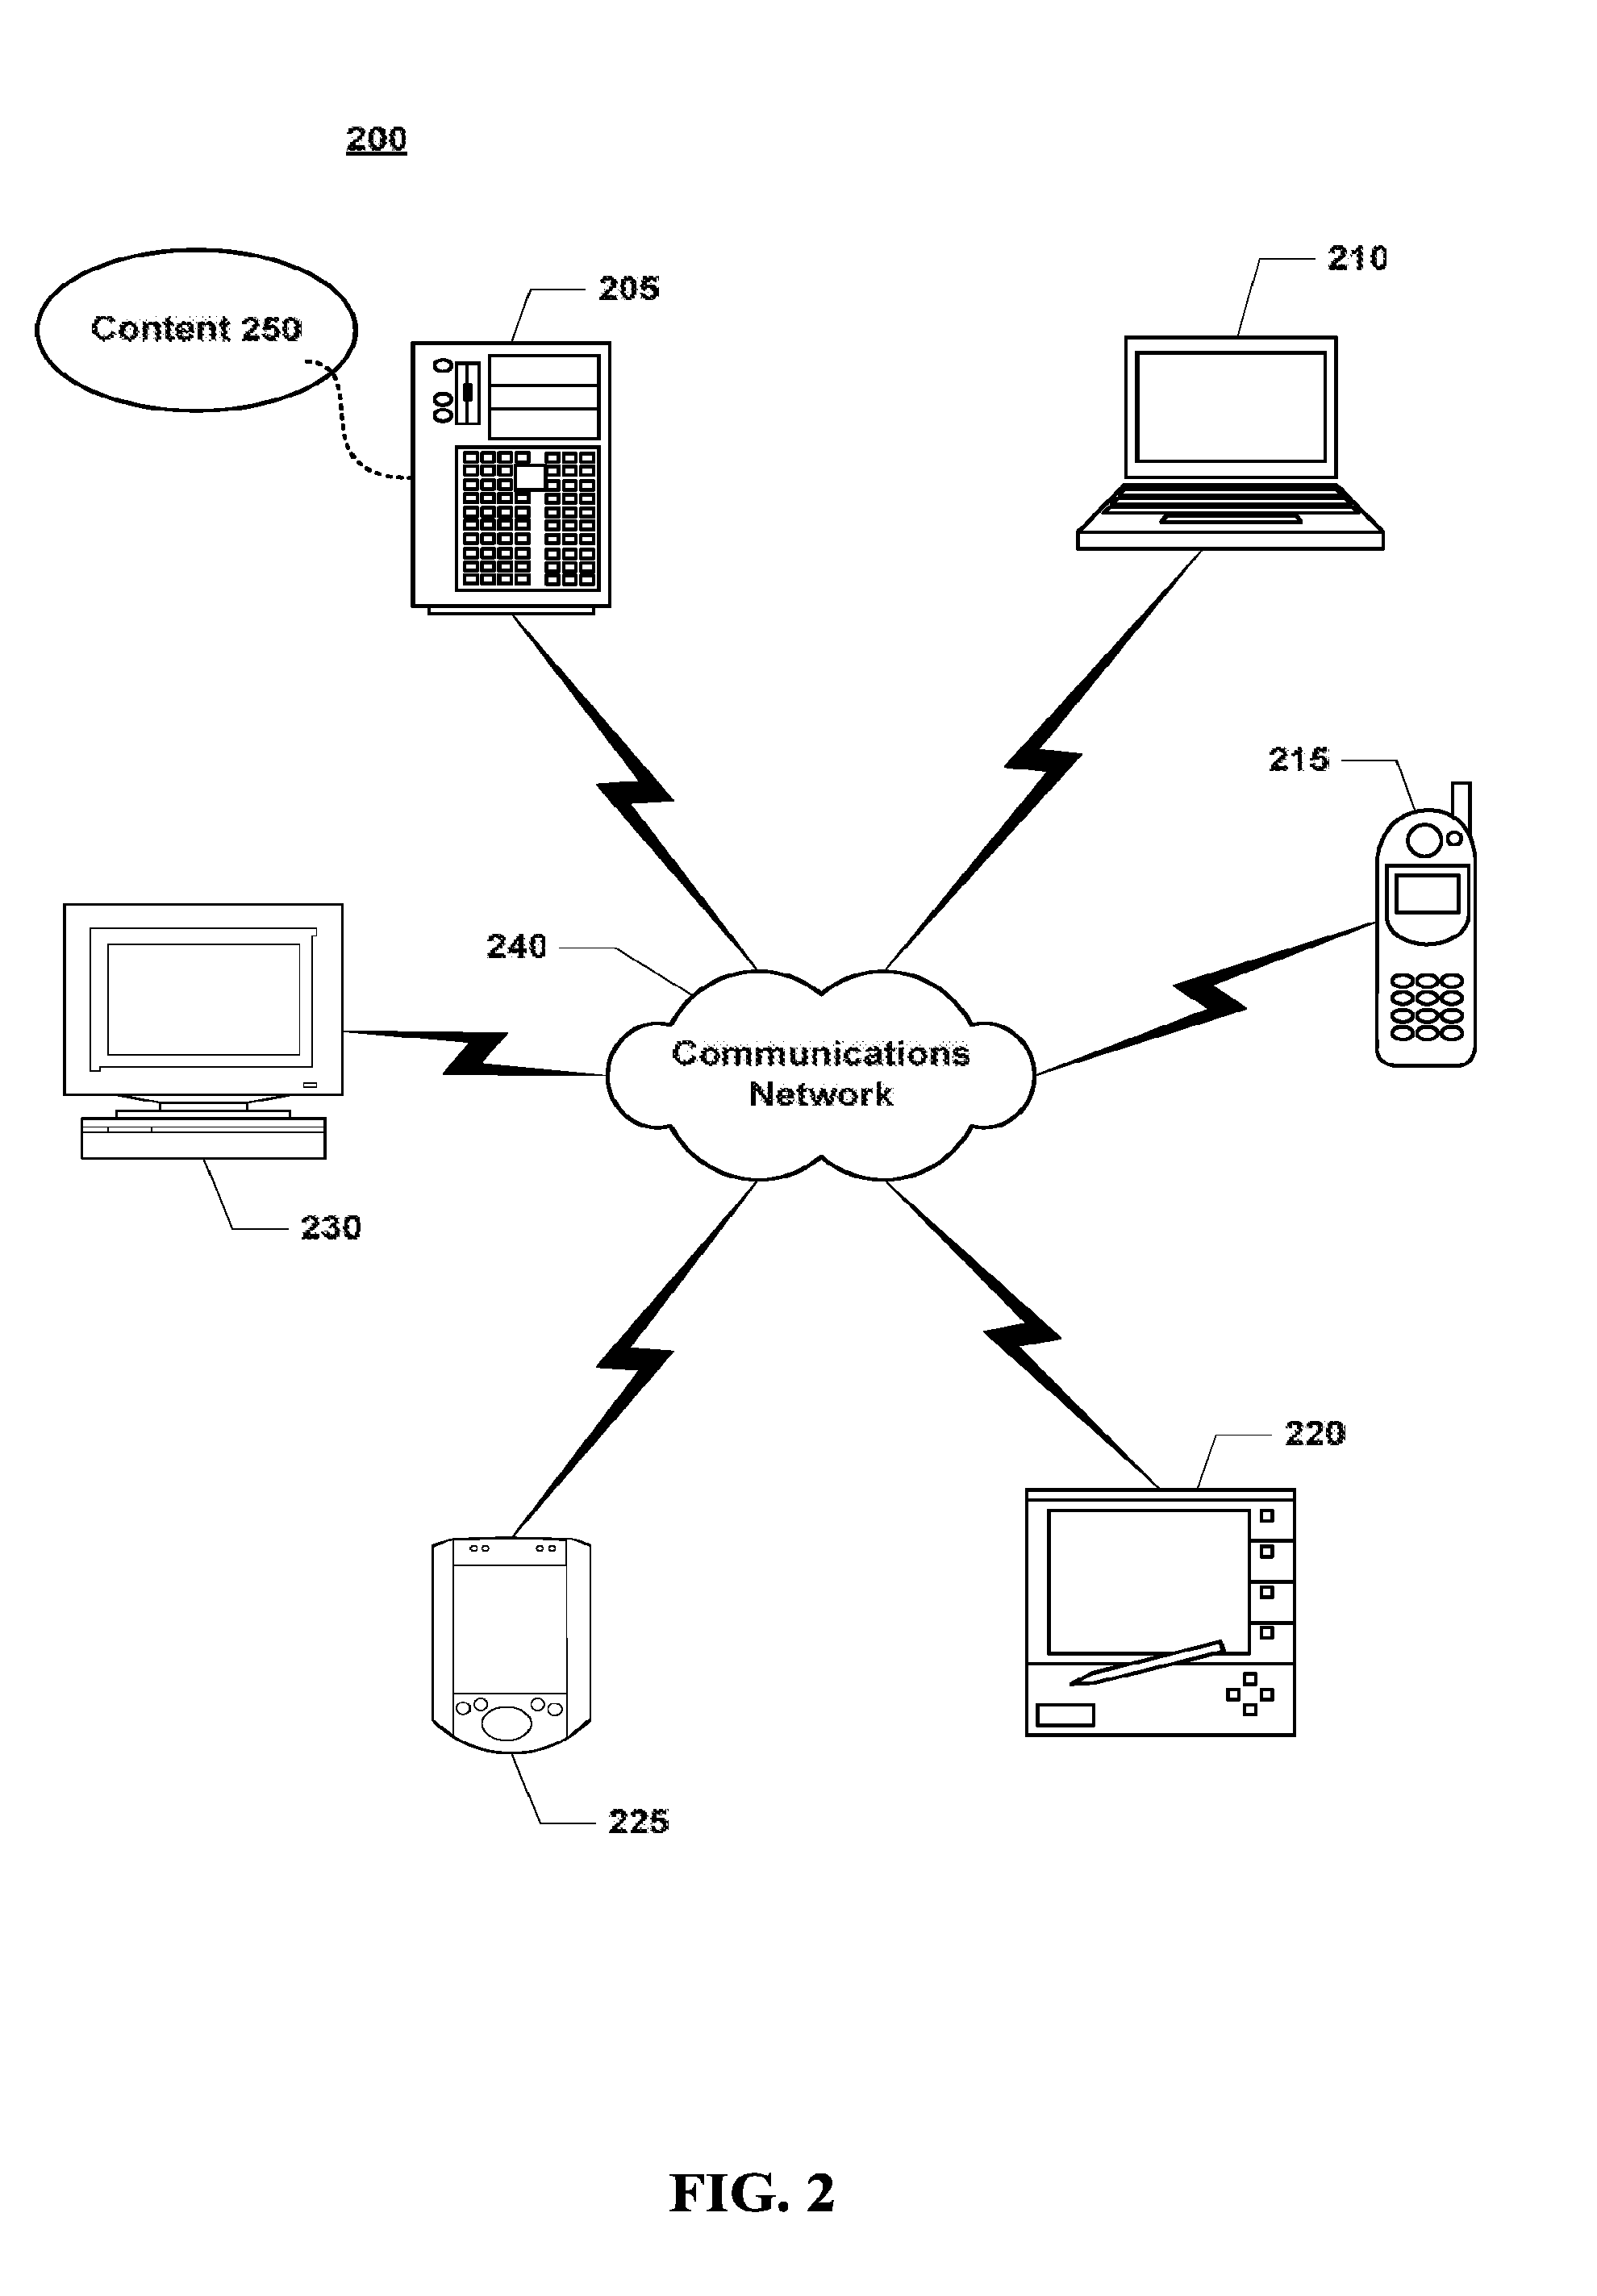 Computer-Based System and Method for Flexible Project Management